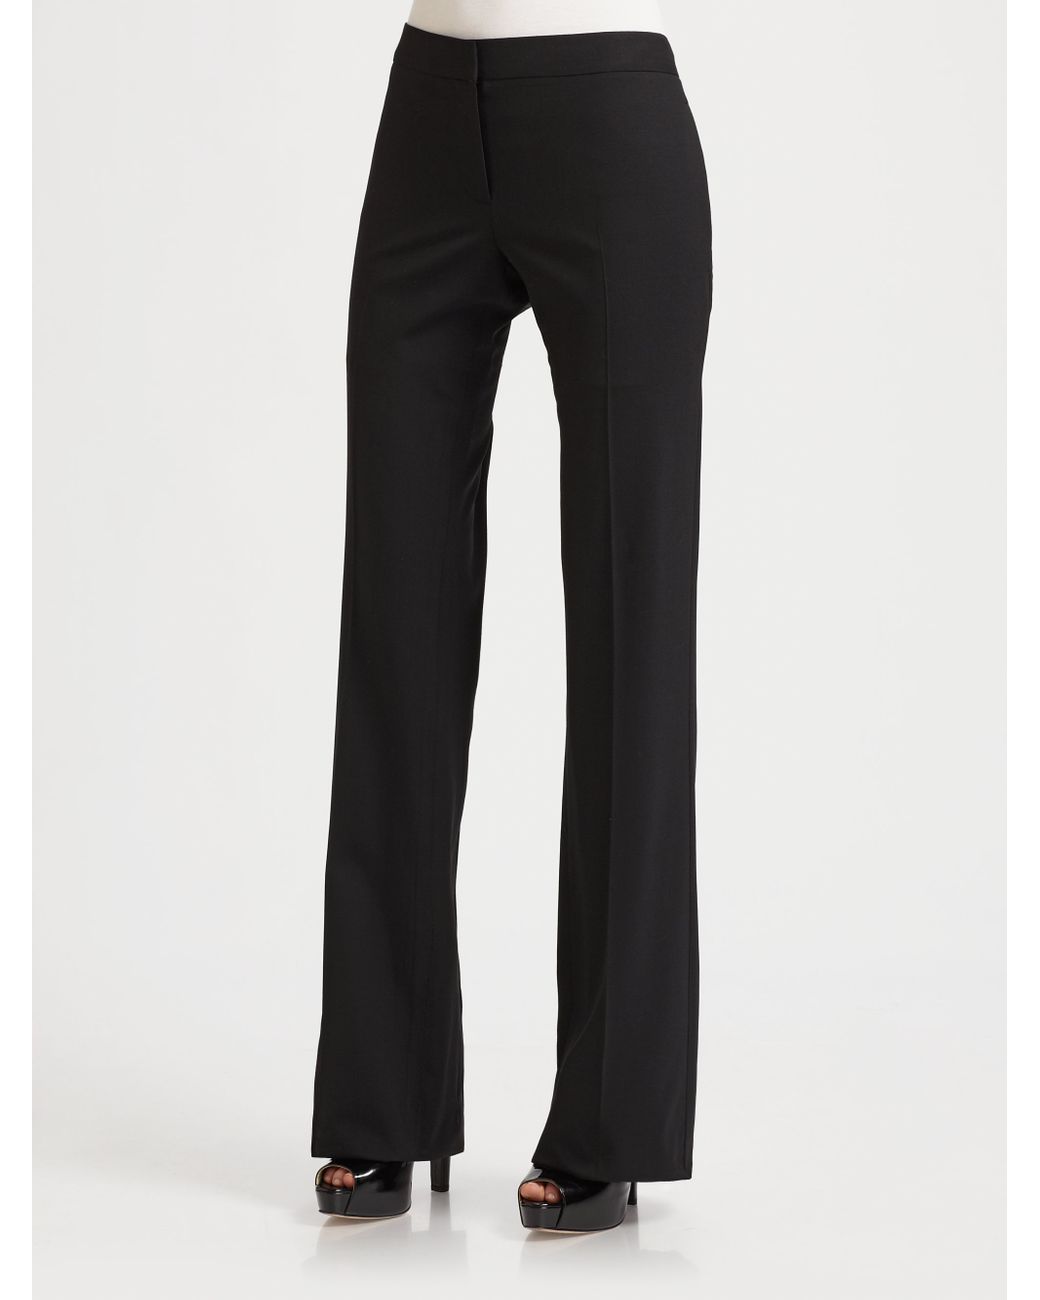 Theory Yadie Pleated Flare Dress Pants in Black | Lyst